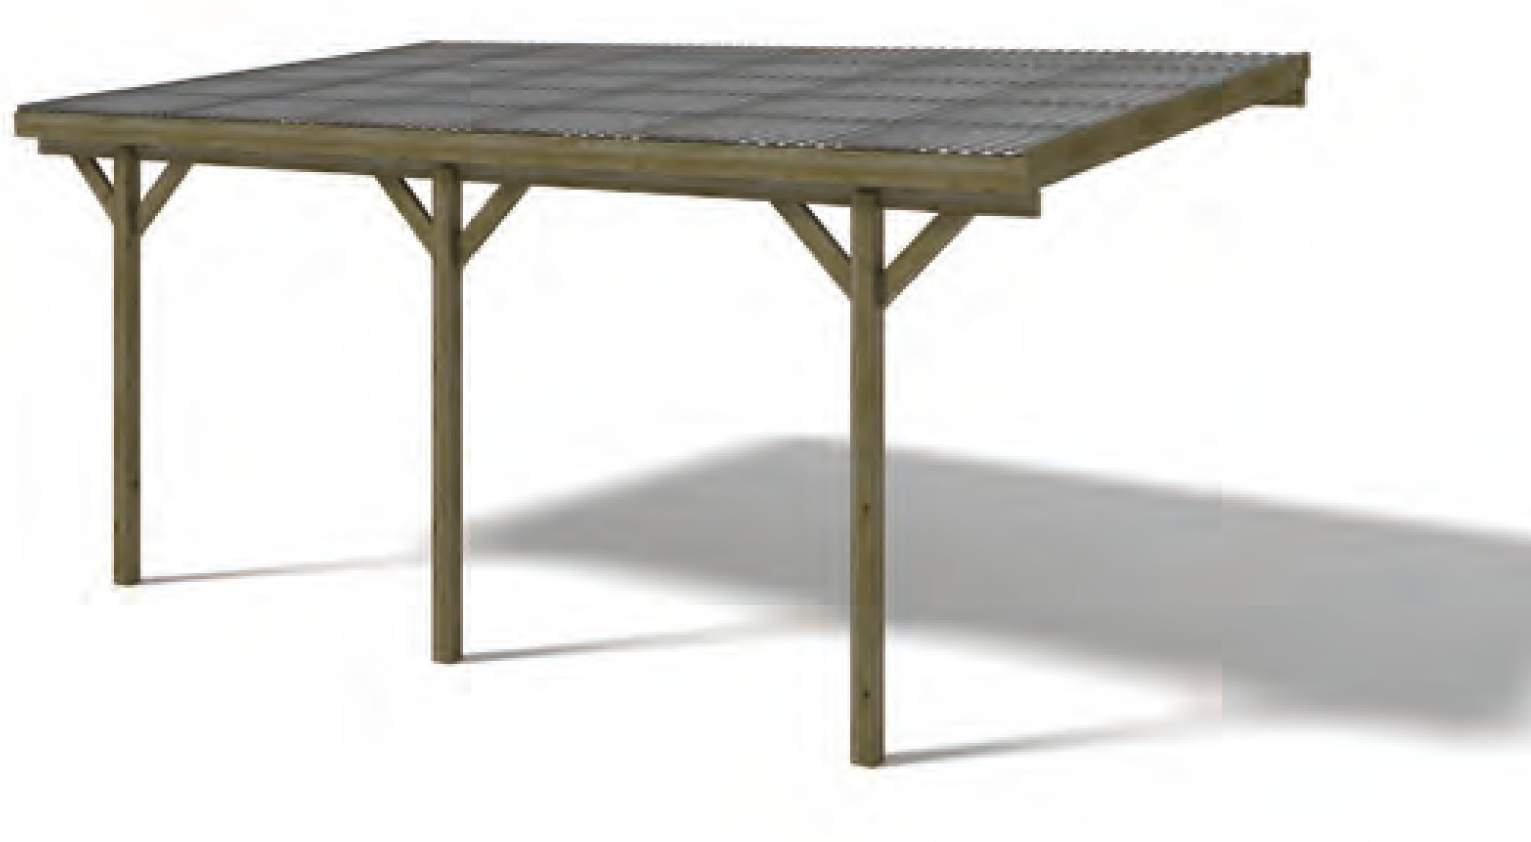 Pergola supported by wood with cover 509 x 302 x 240 cm